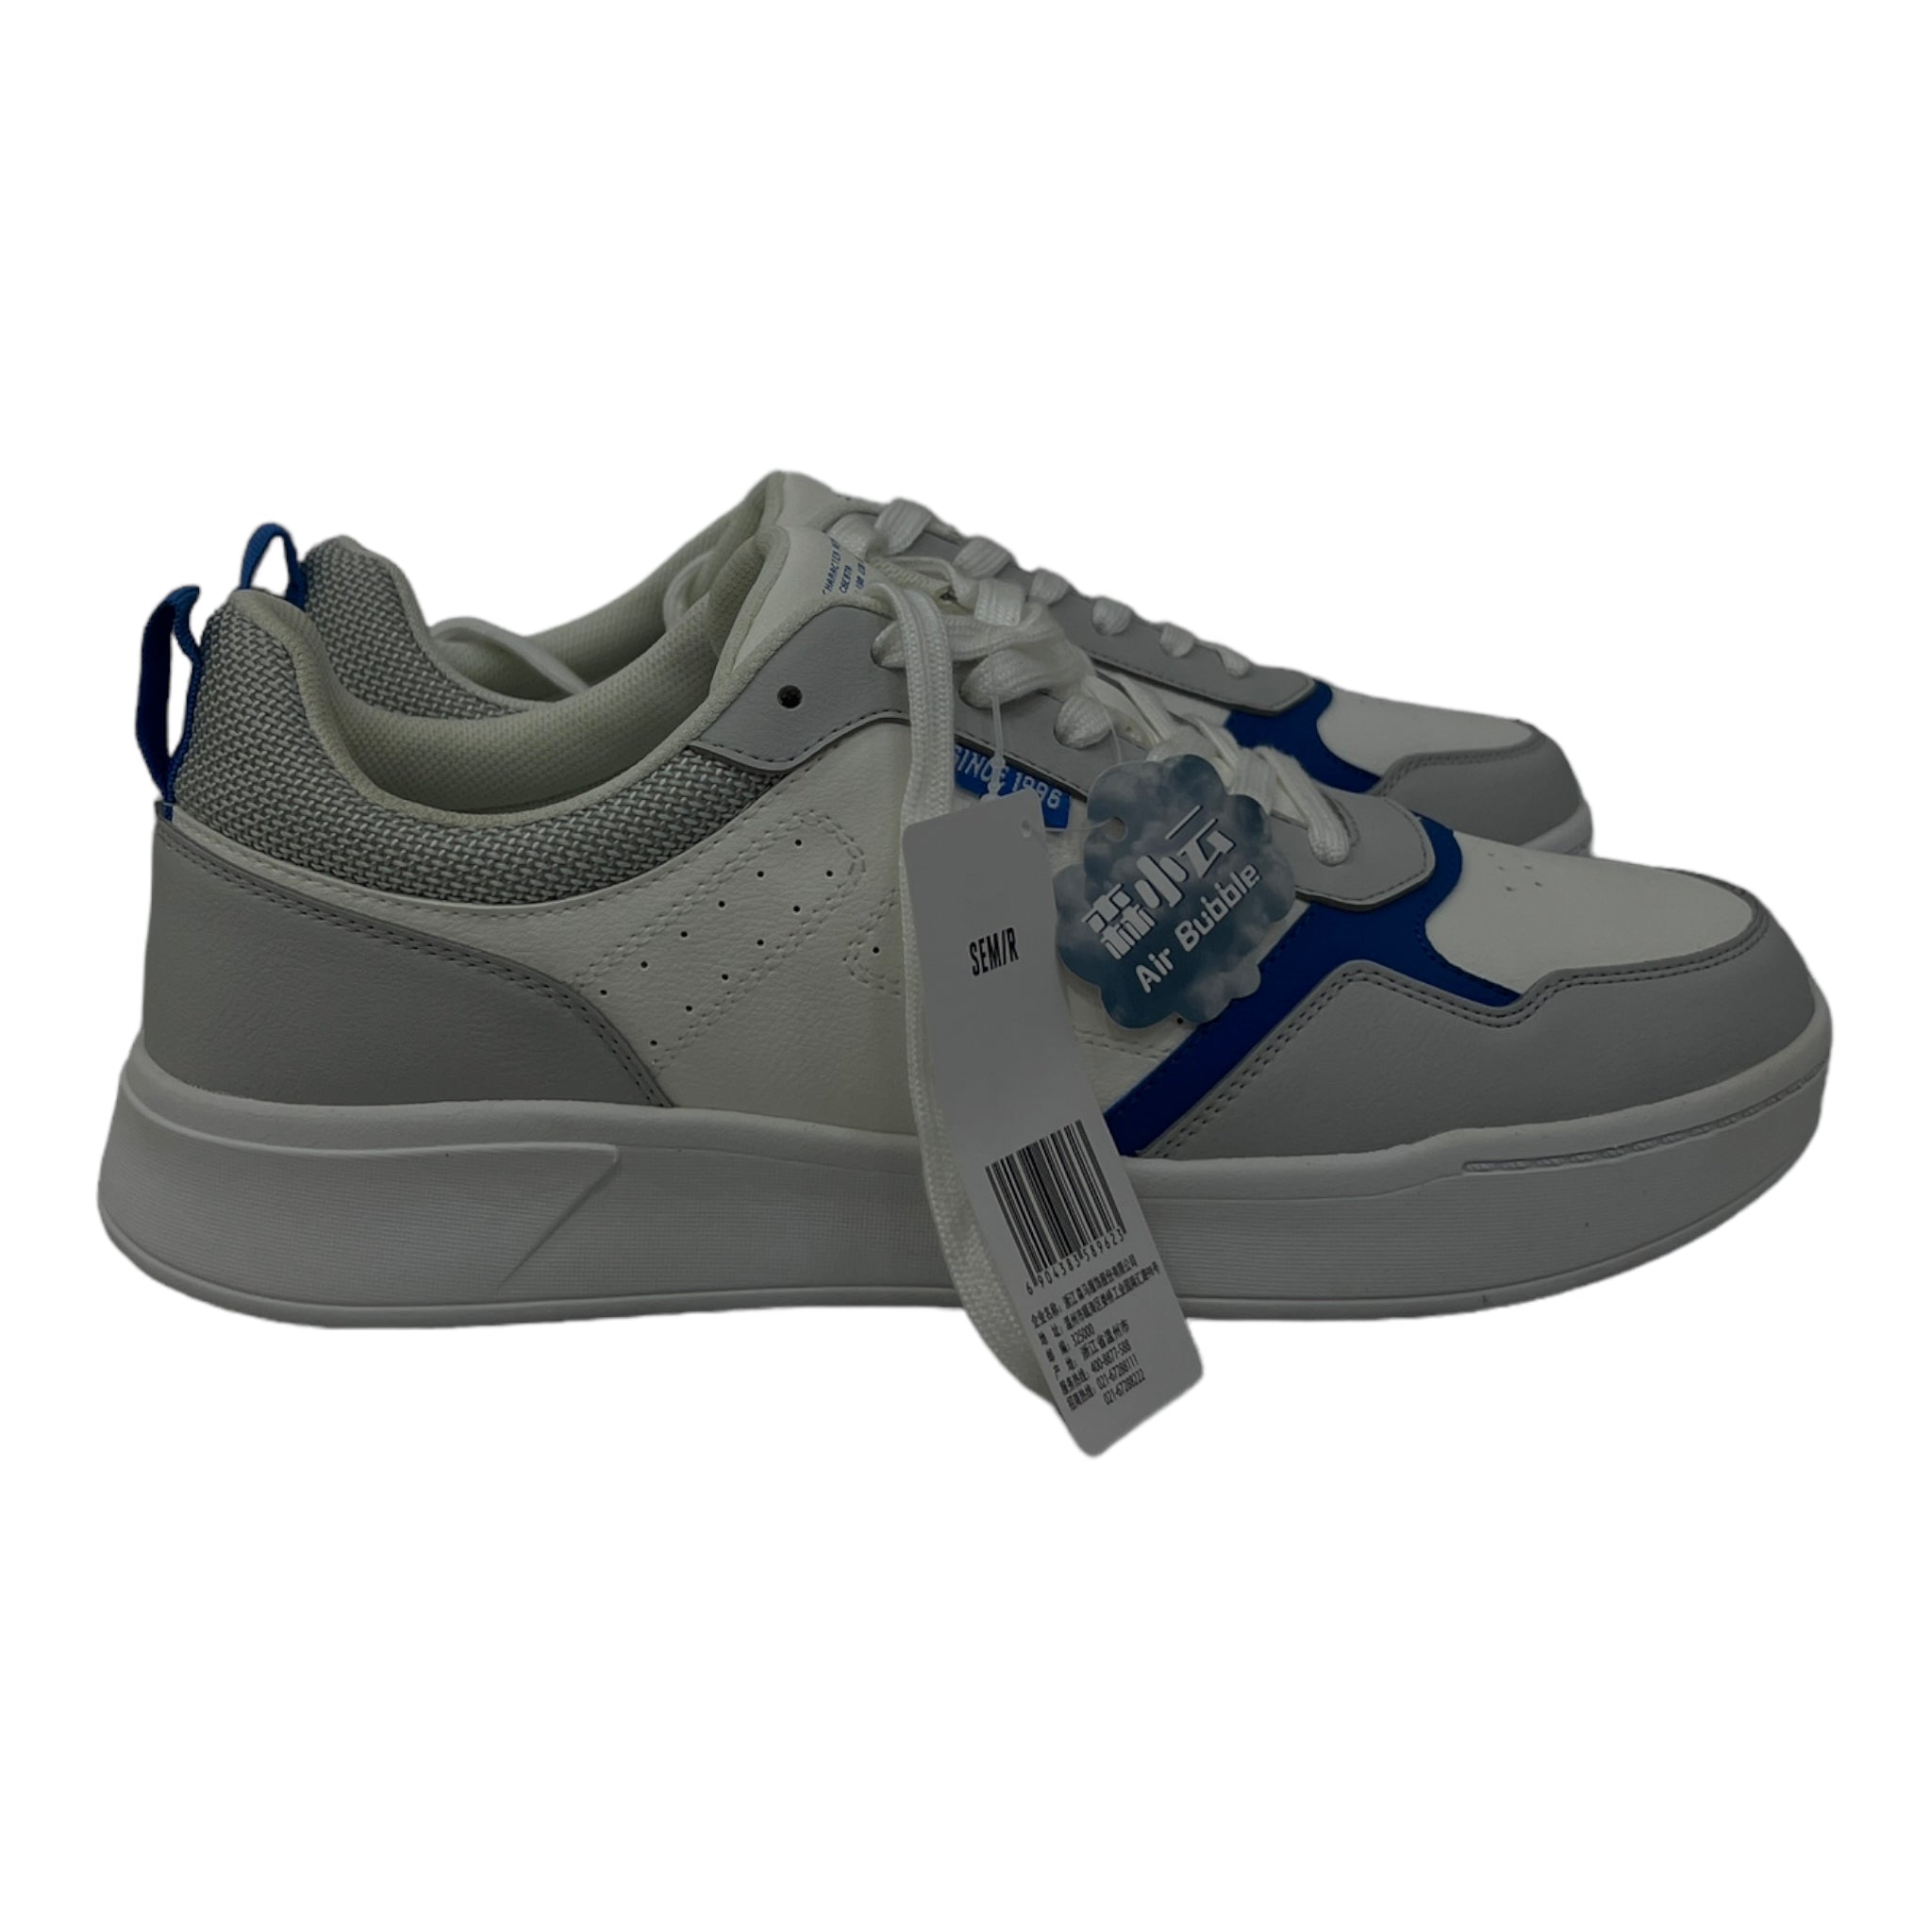 SEMIR UNISEX SNEAKERS WITH BLUE TAPPINGS IN LIGHT GREY